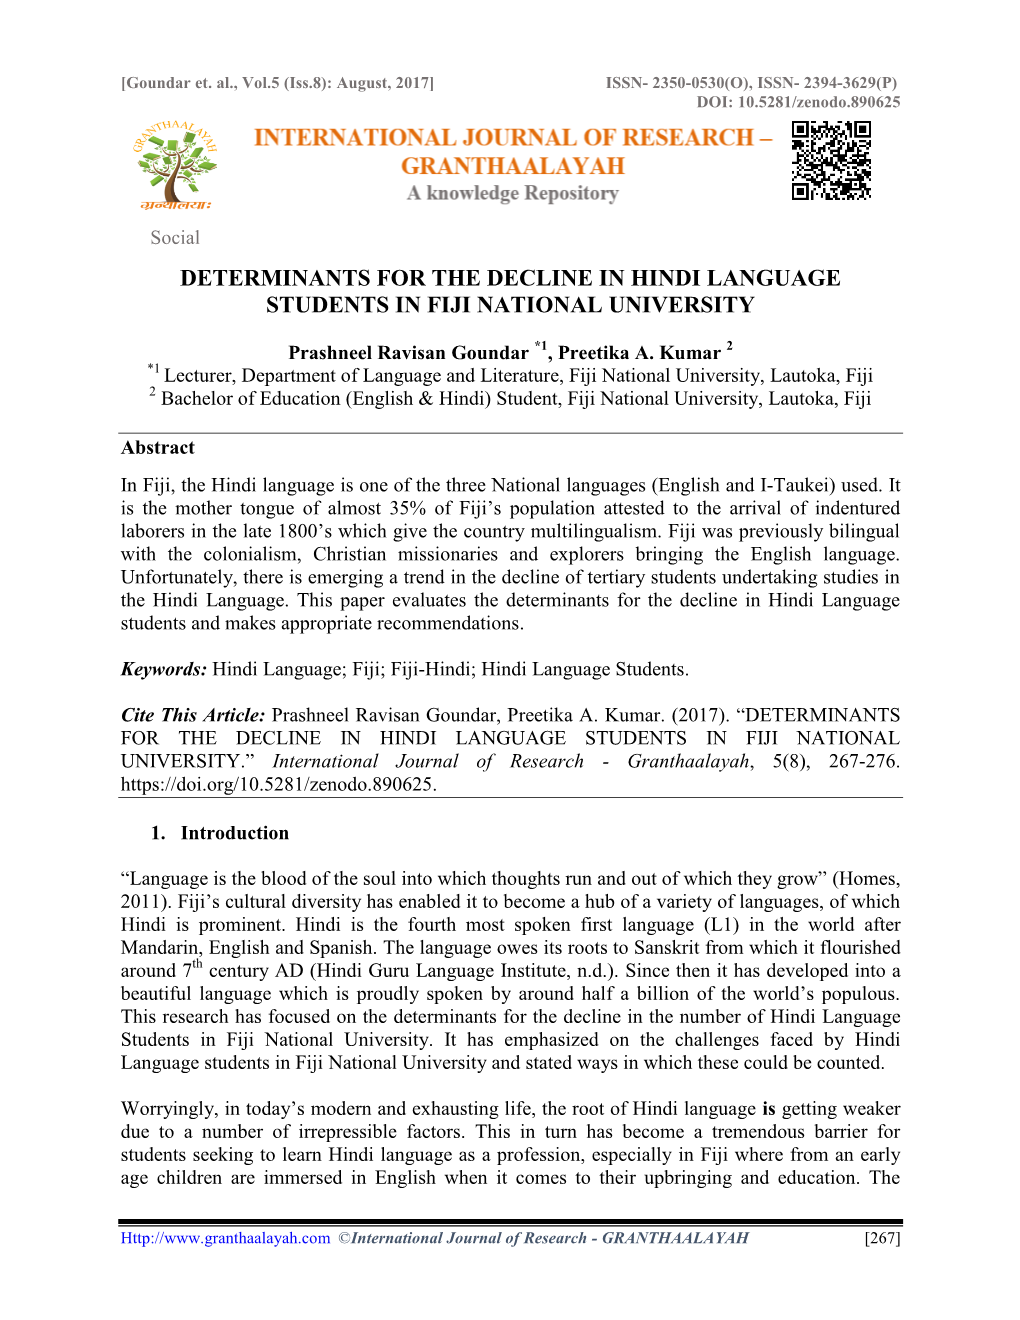 Determinants for the Decline in Hindi Language Students in Fiji National University